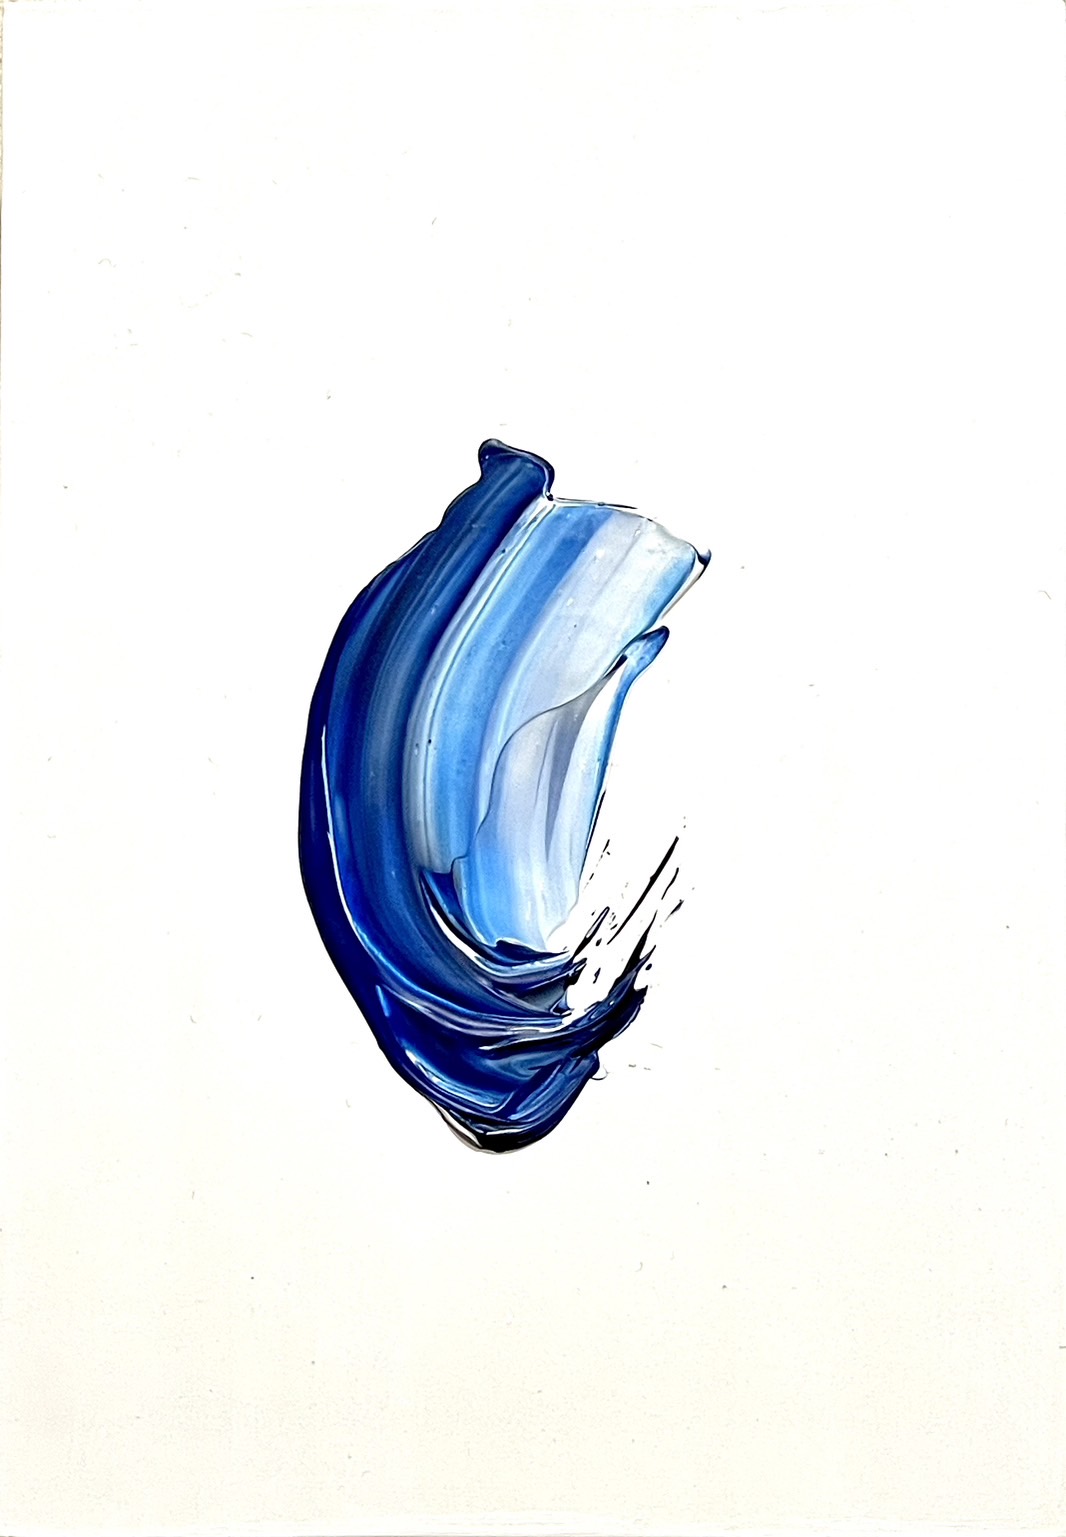 On a white background, a paint paste with different shade of blue and white